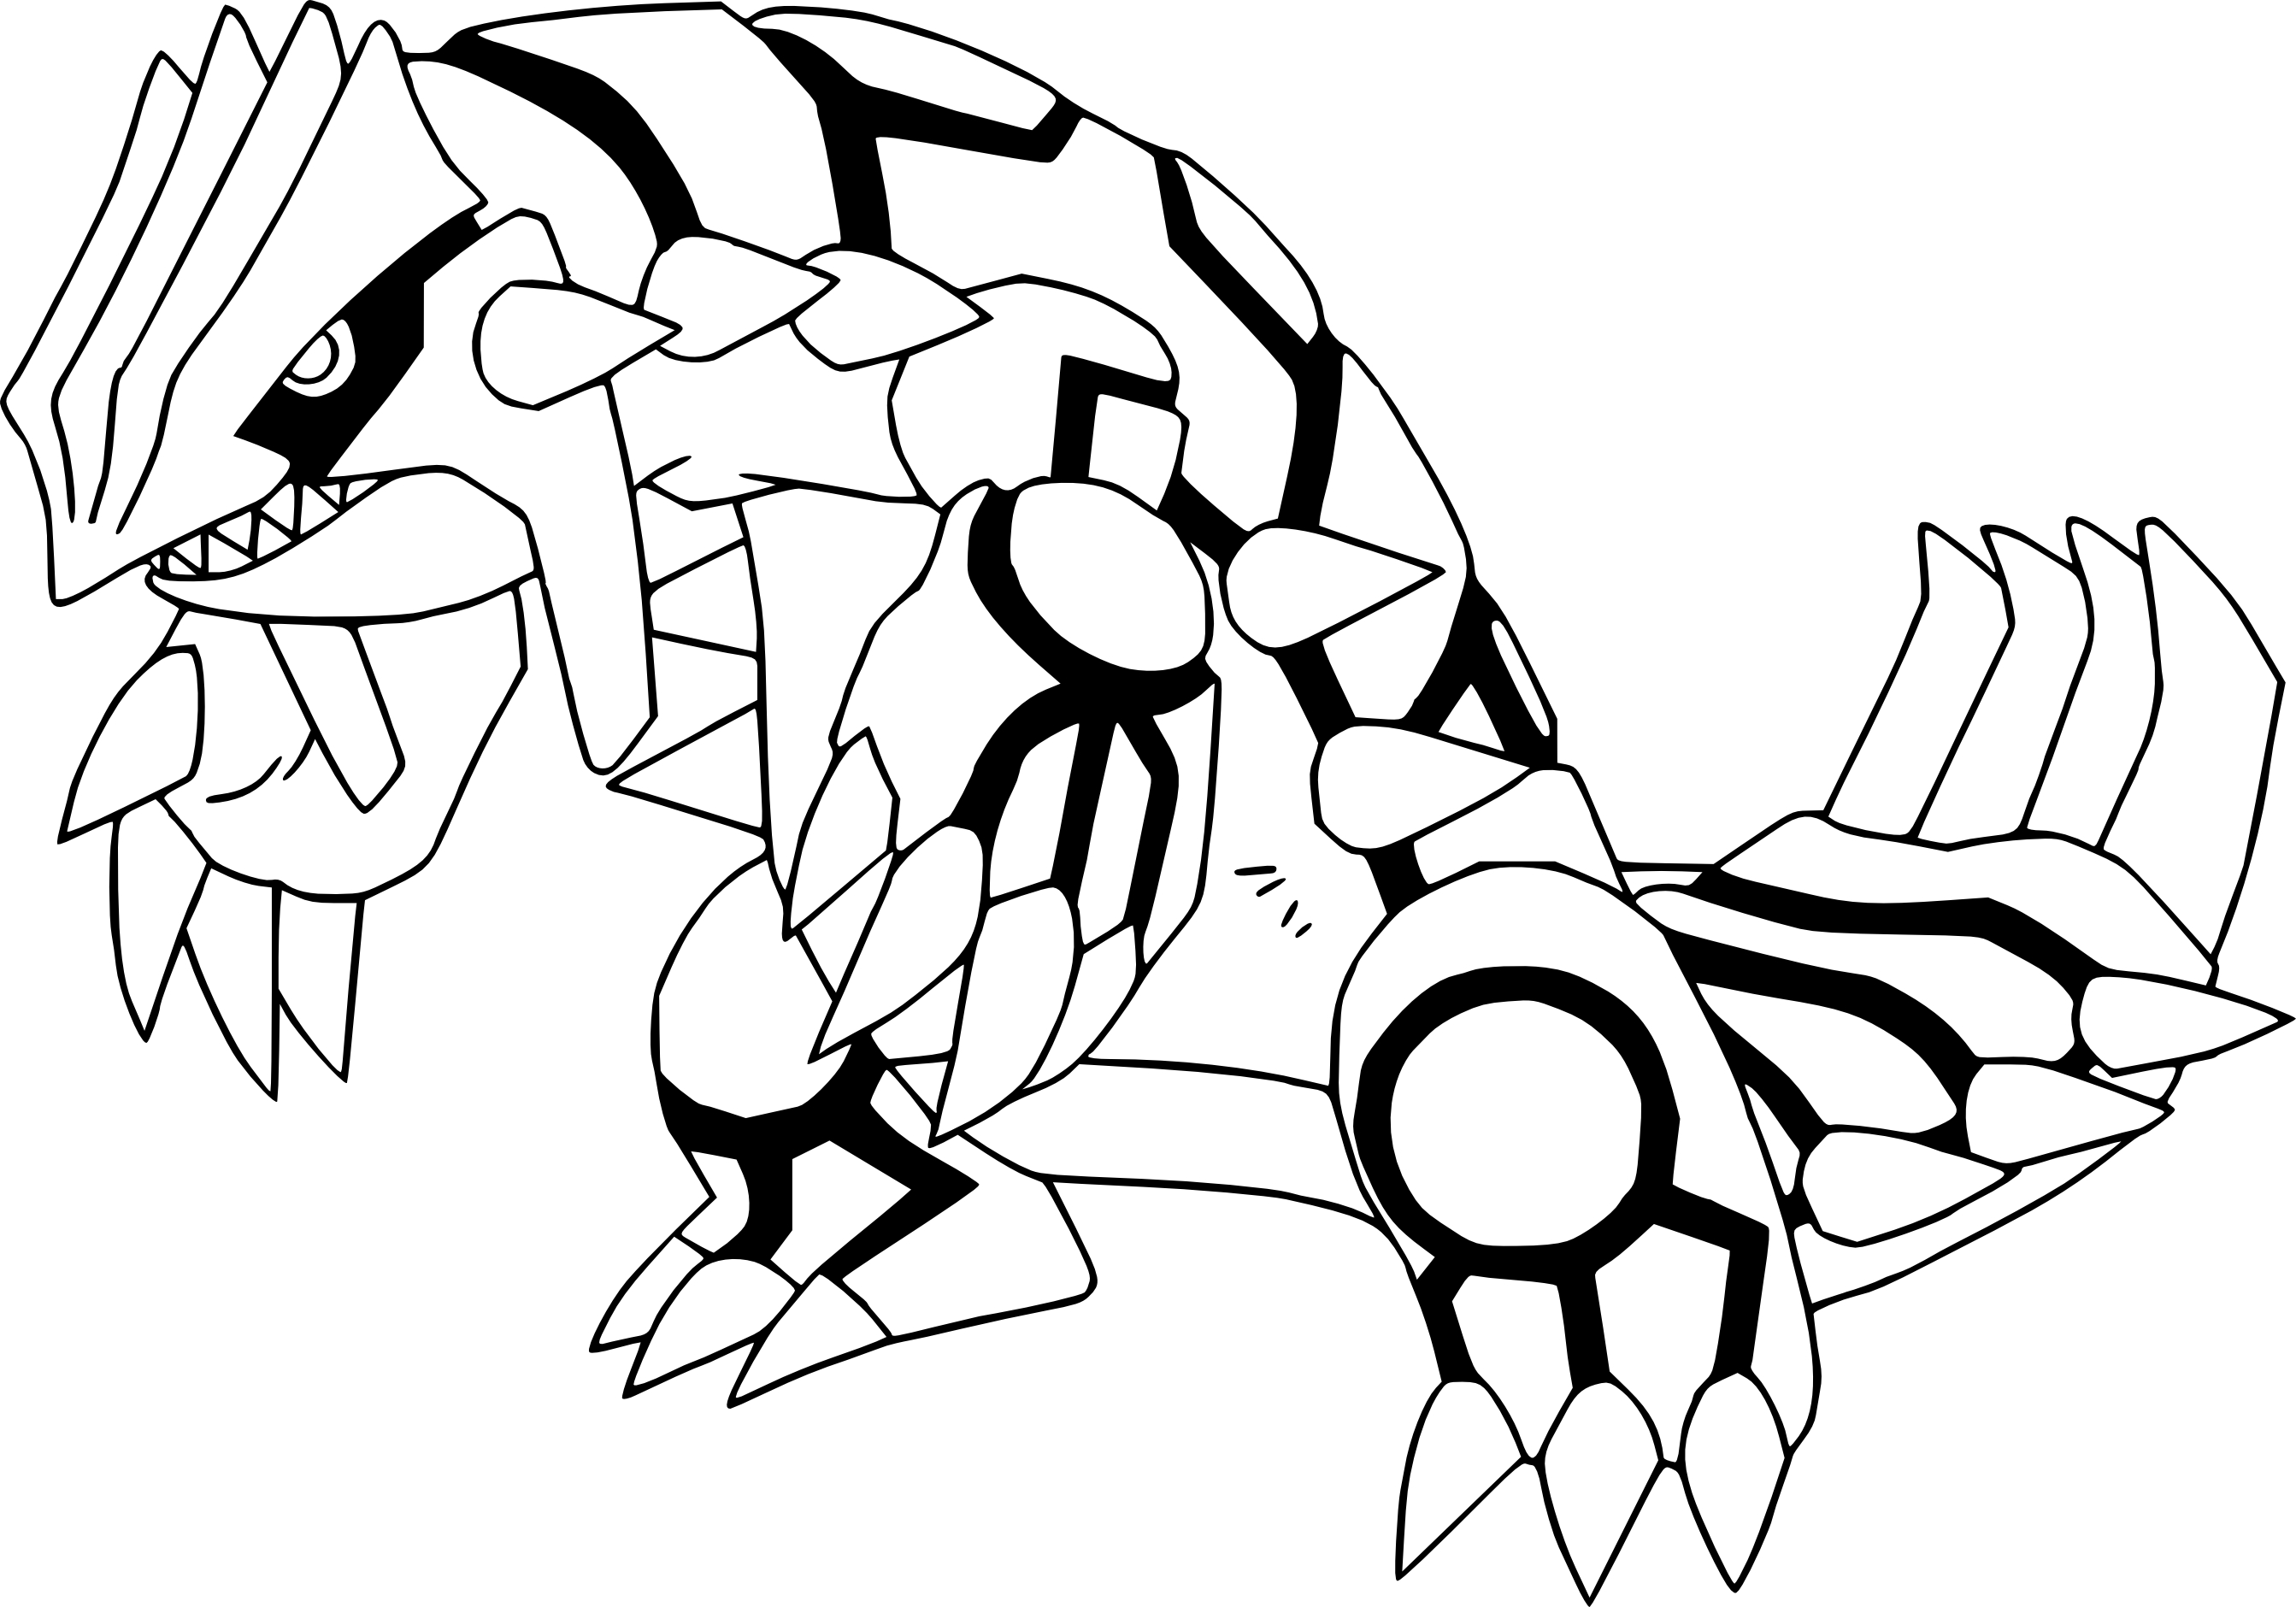 Pokemon Groudon coloring page